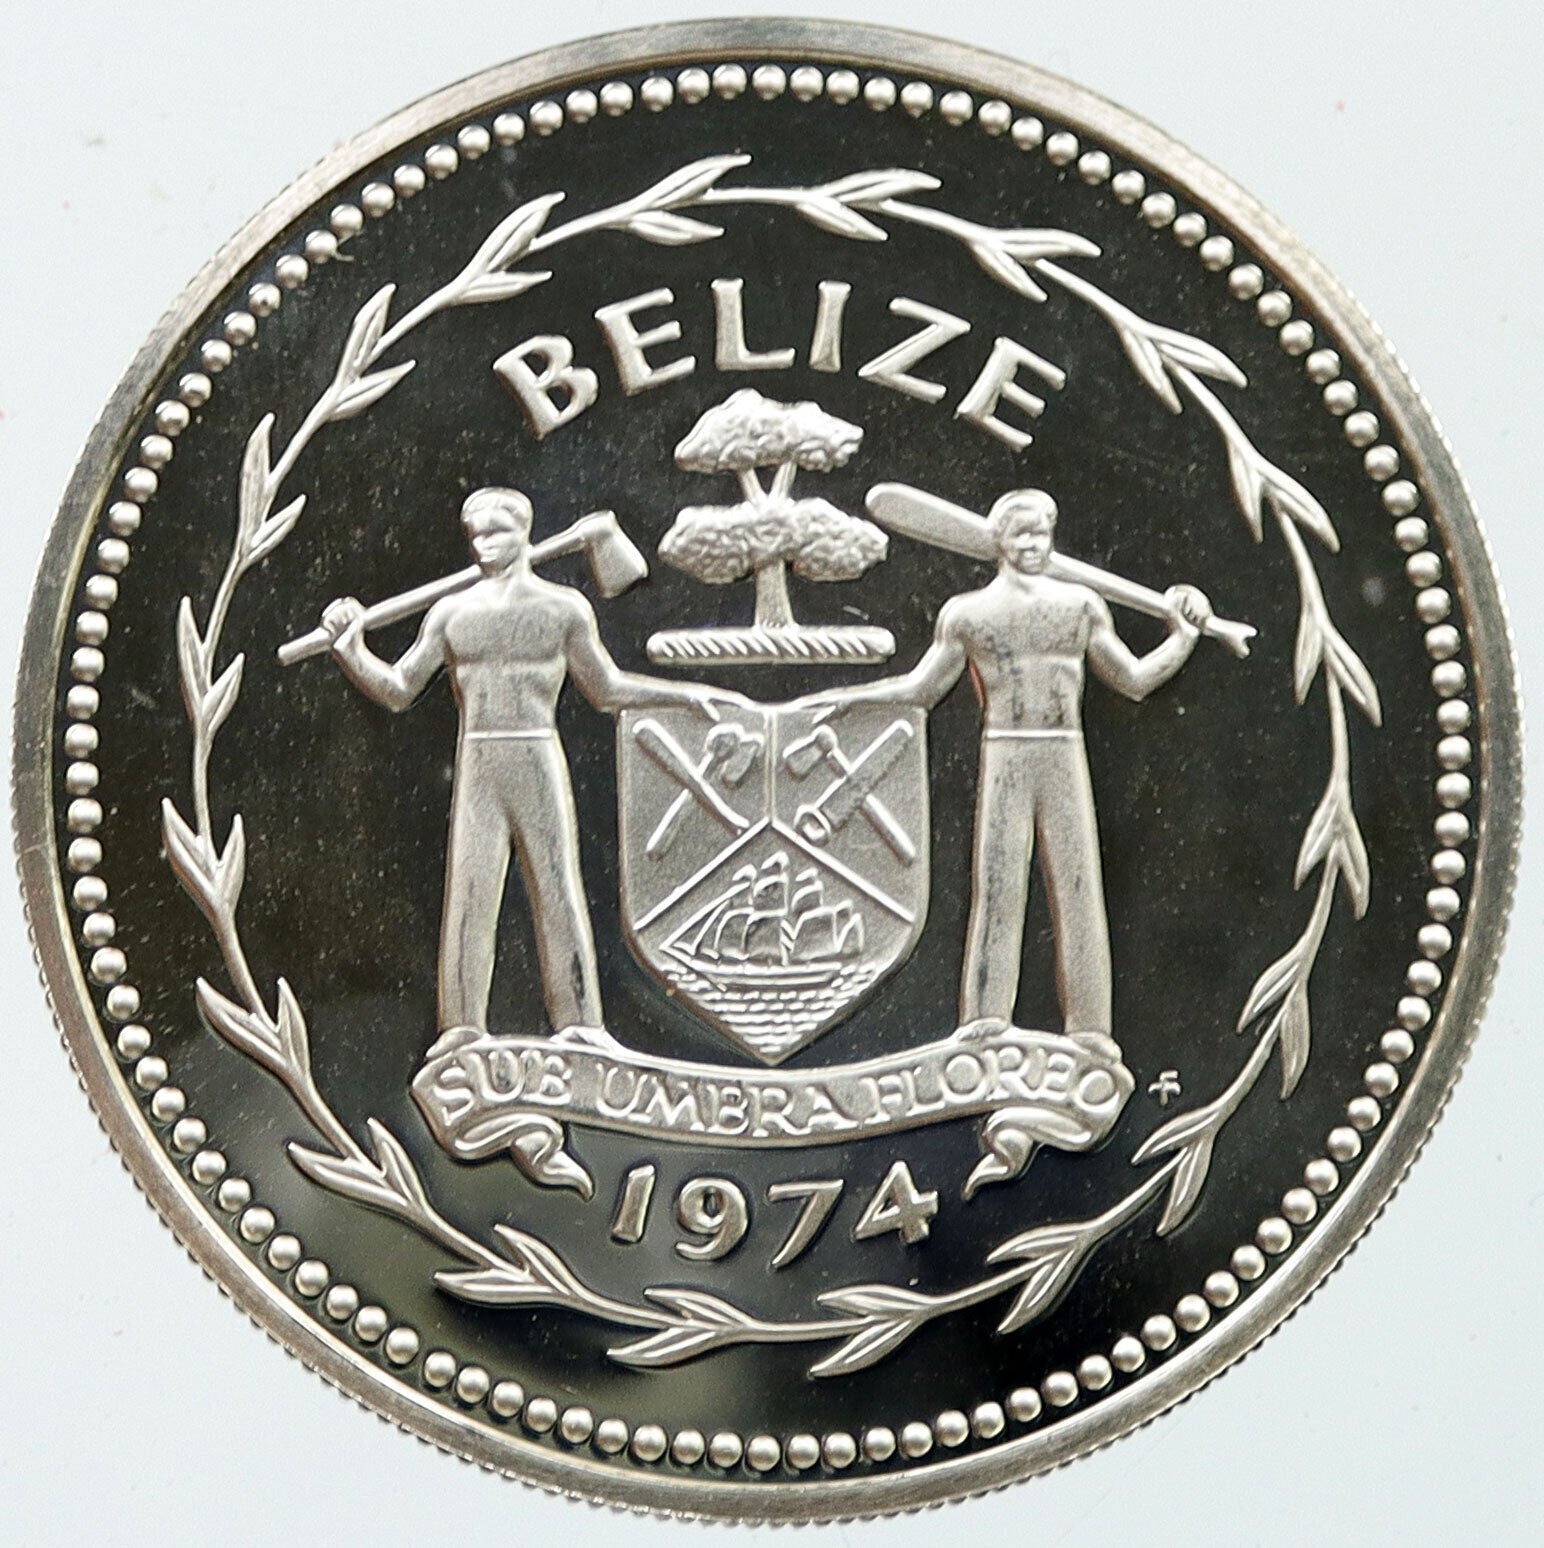 1974 BELIZE Avifauna Great Curasso BIRD VINTAGE Proof Silver $10 Coin i116024